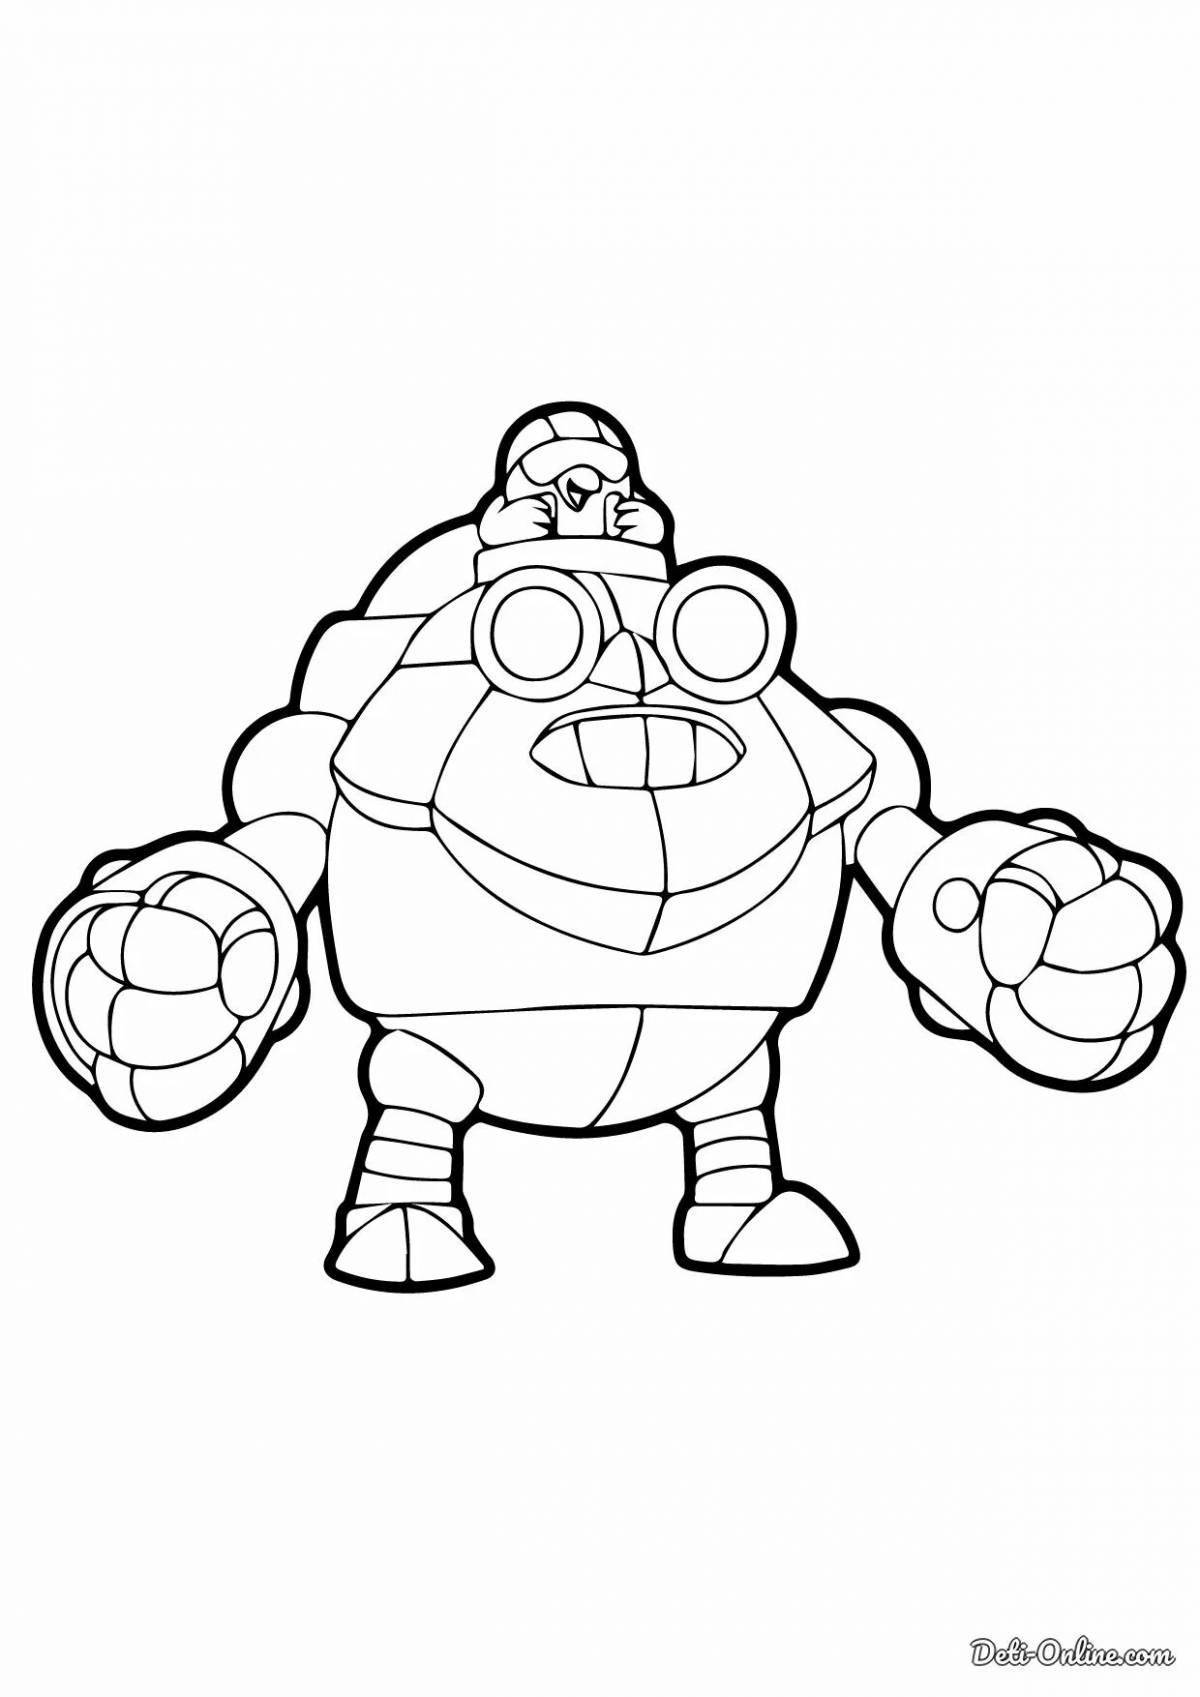 Playful dynamike coloring page